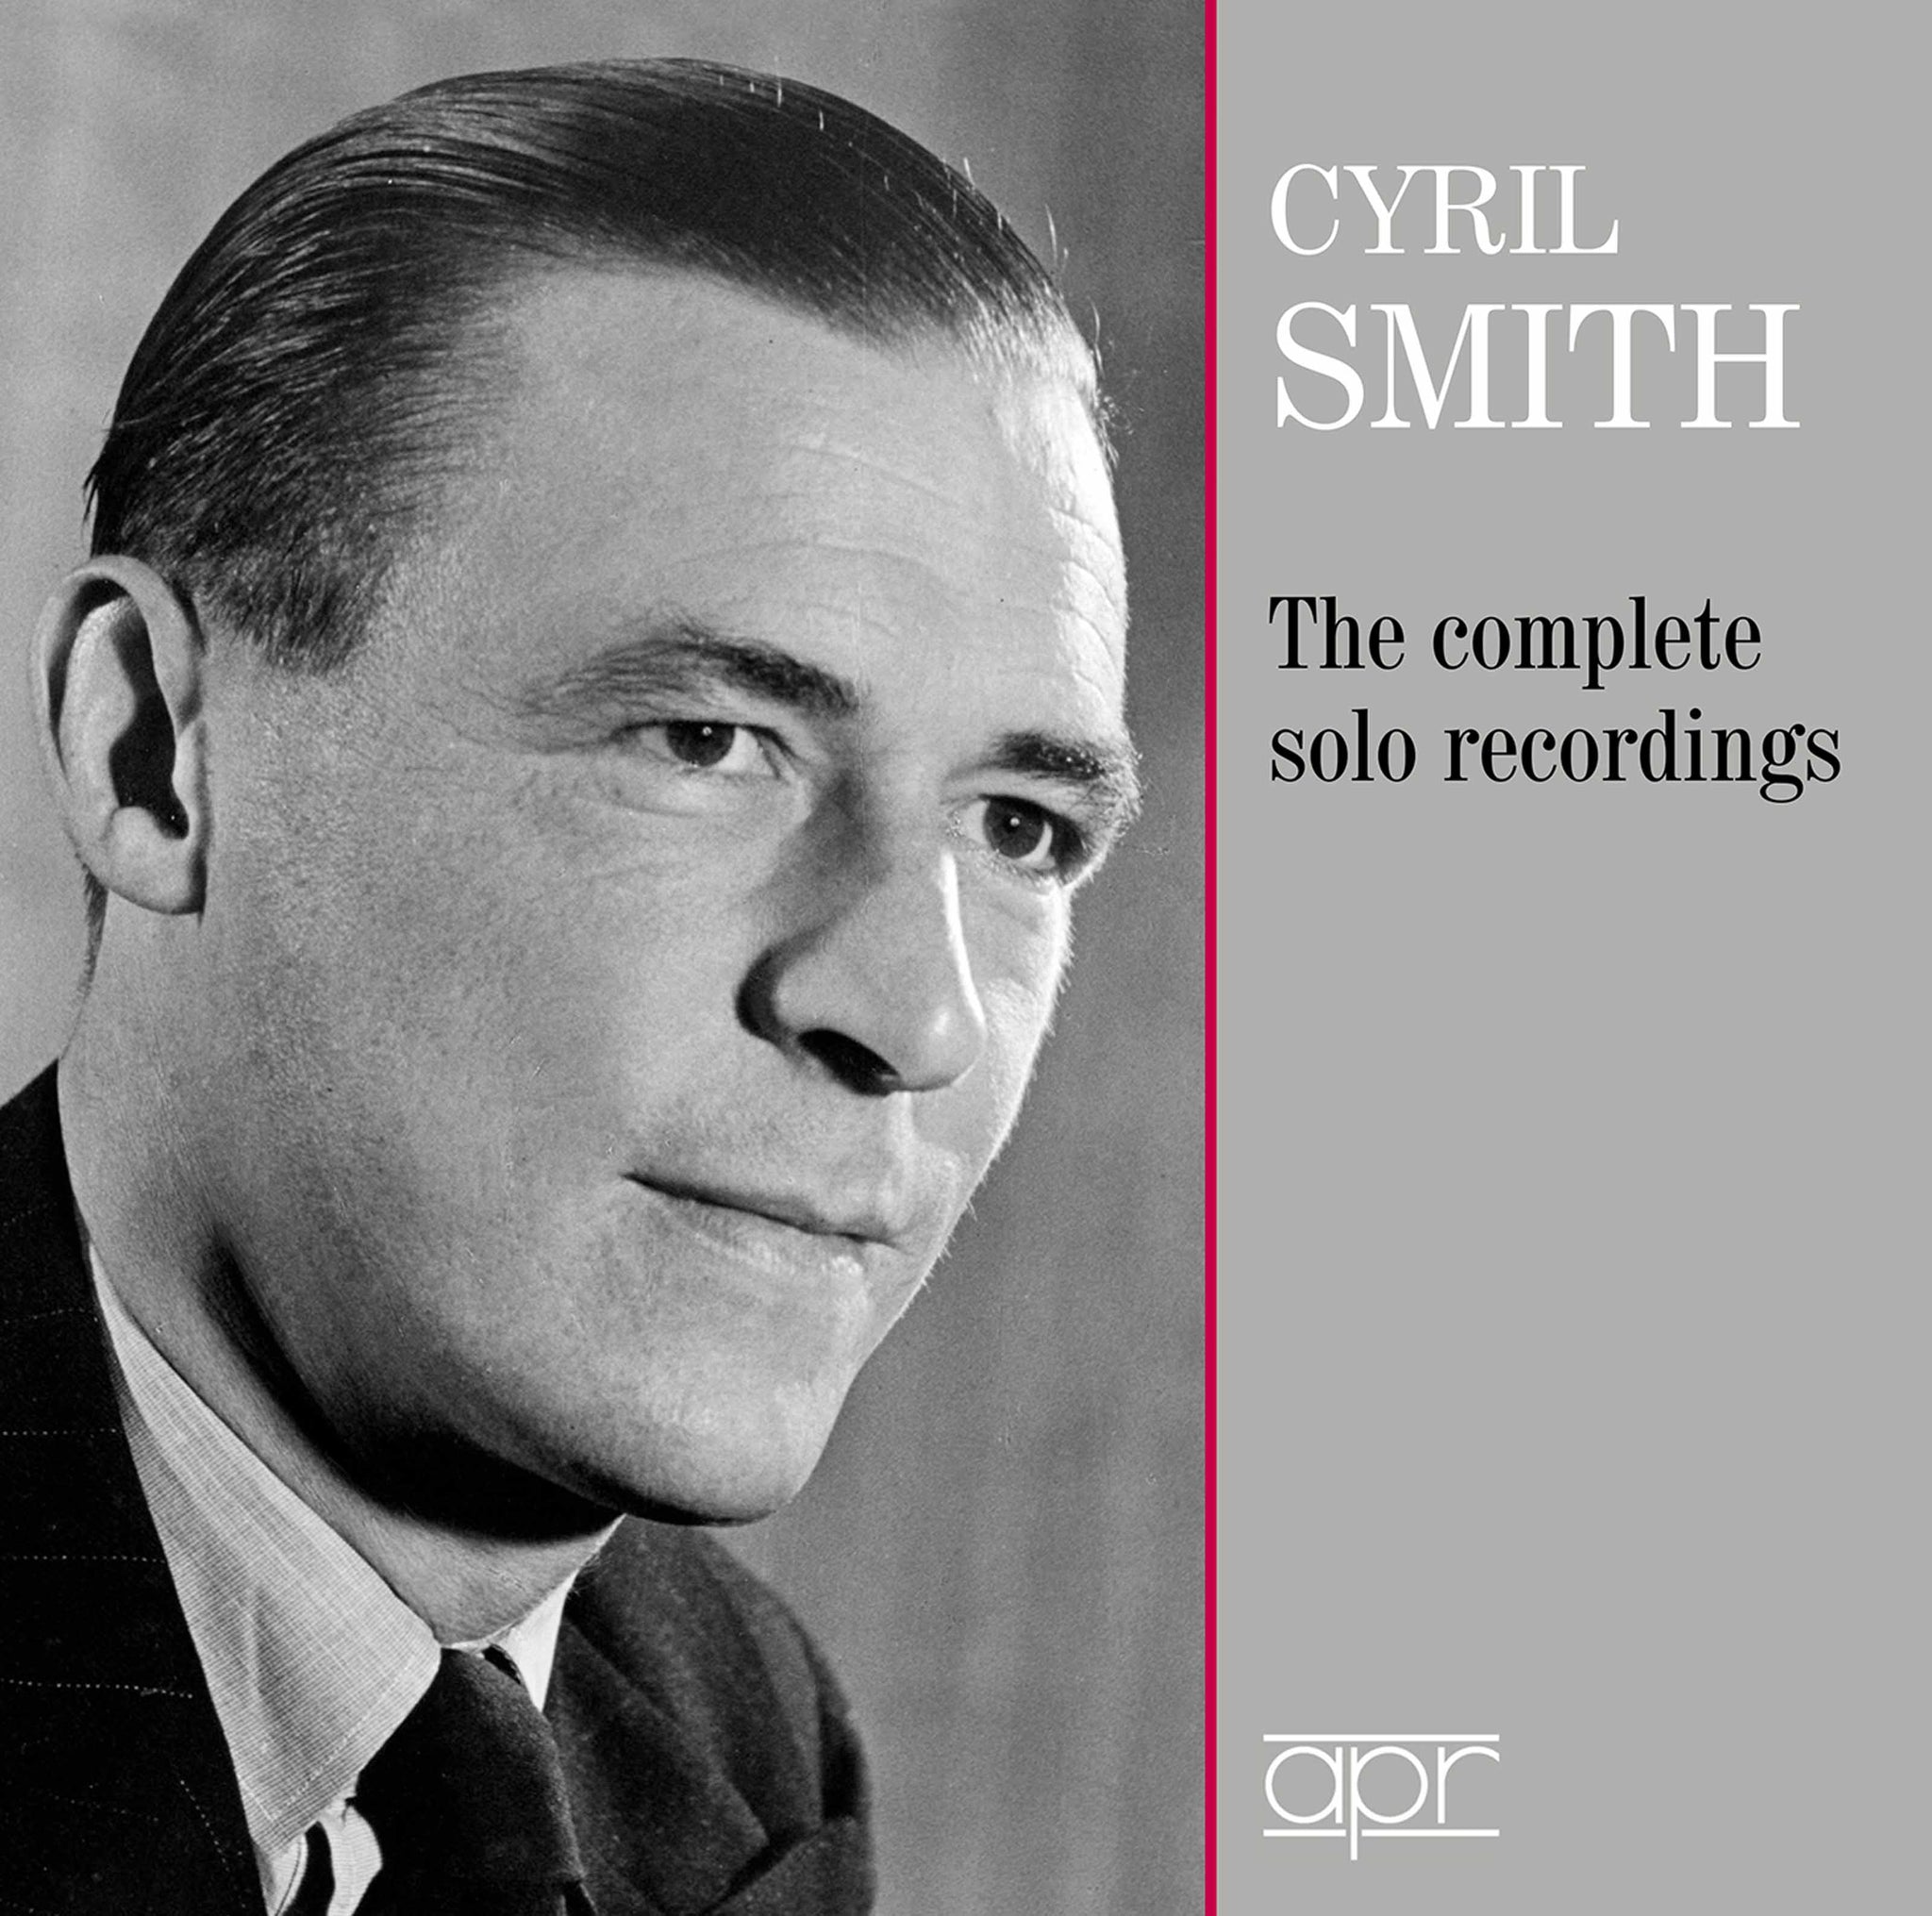 Cyril Smith - The Complete Solo Recordings